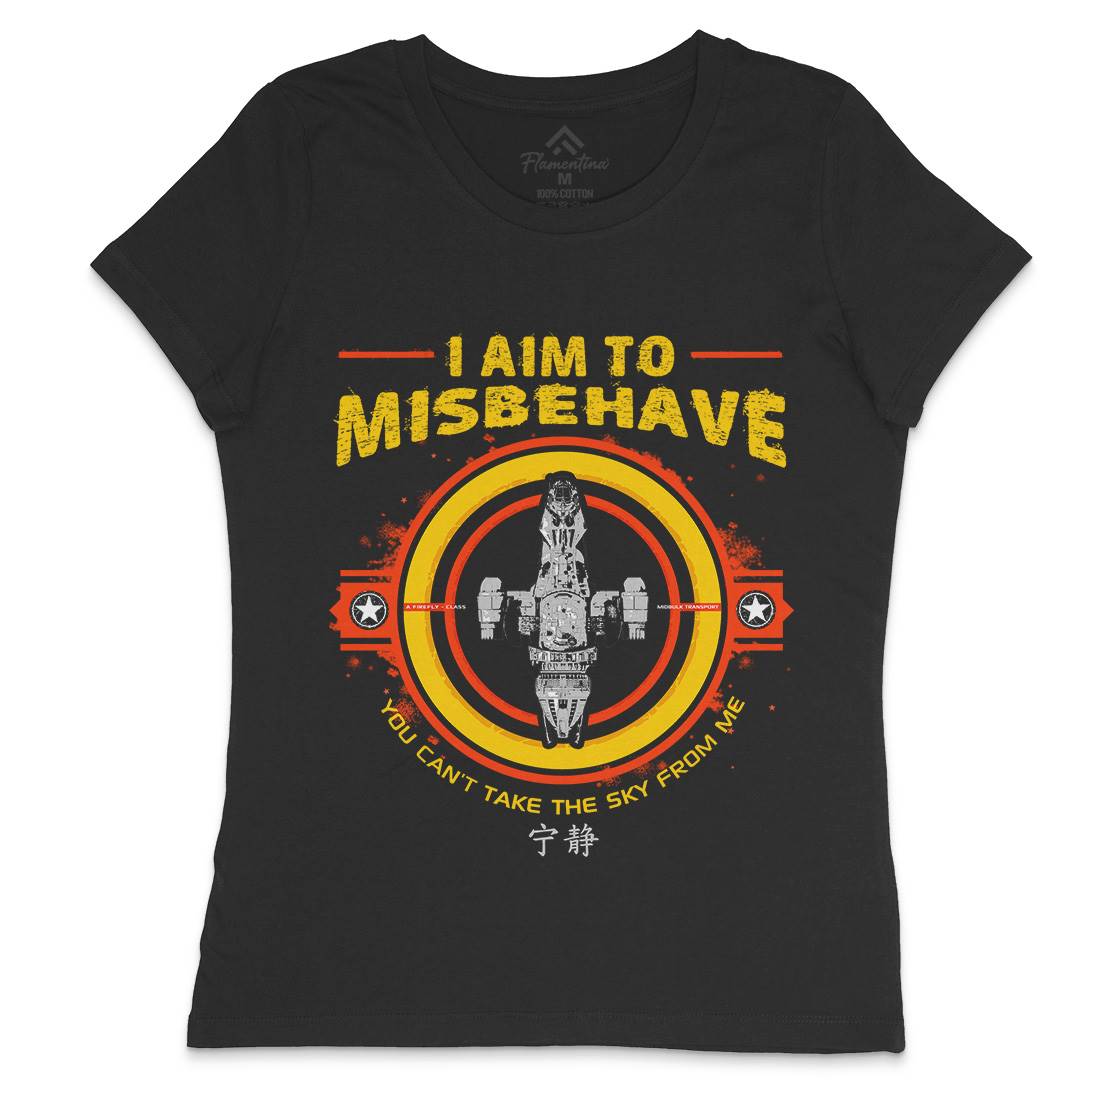 I Aim To Misbehave Womens Crew Neck T-Shirt Space D352